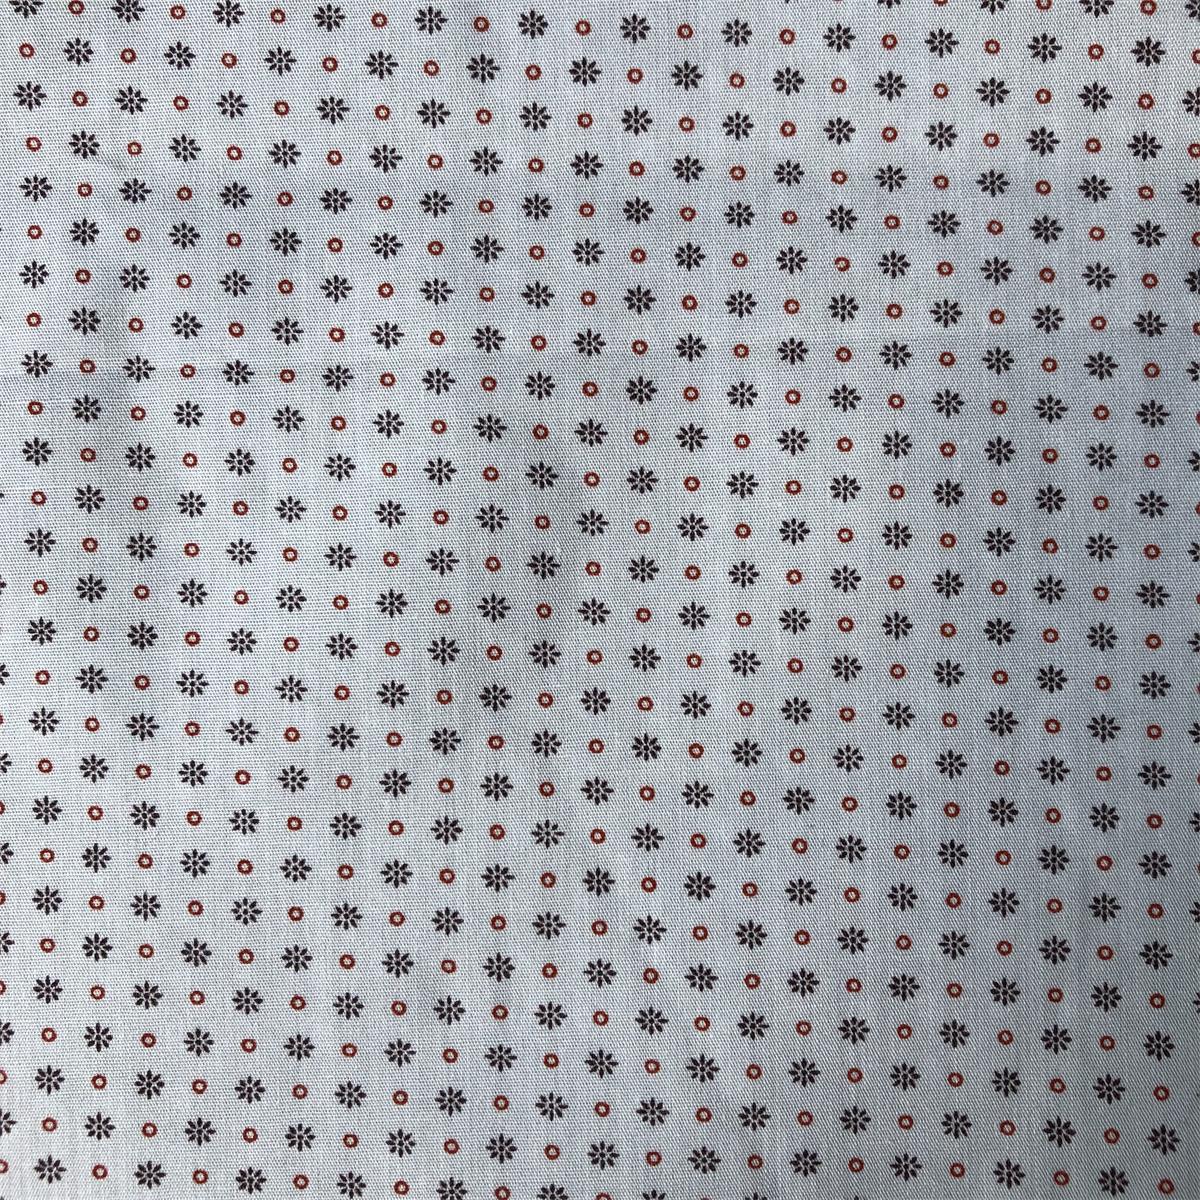 China Textile Cotton fabric 50S compact yarn soft for mens shirts 100 Cotton poplin printed silky soft shirts fabric 